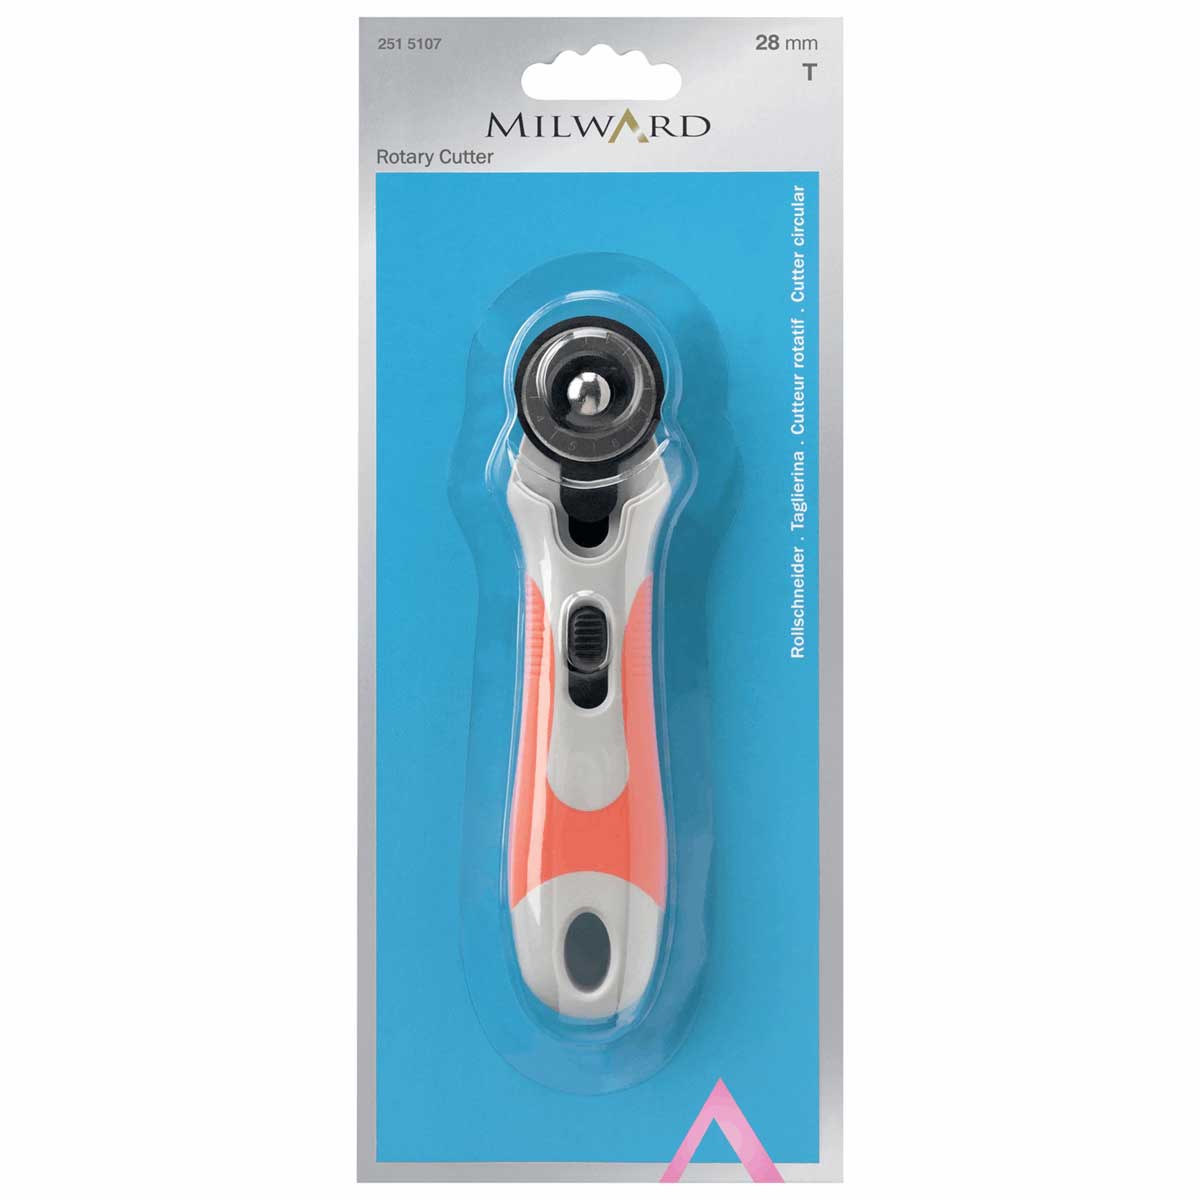 Milward Rotary Cutter 28mm | Oh Sew Sweet Shop -Patchwork Fabrics ...